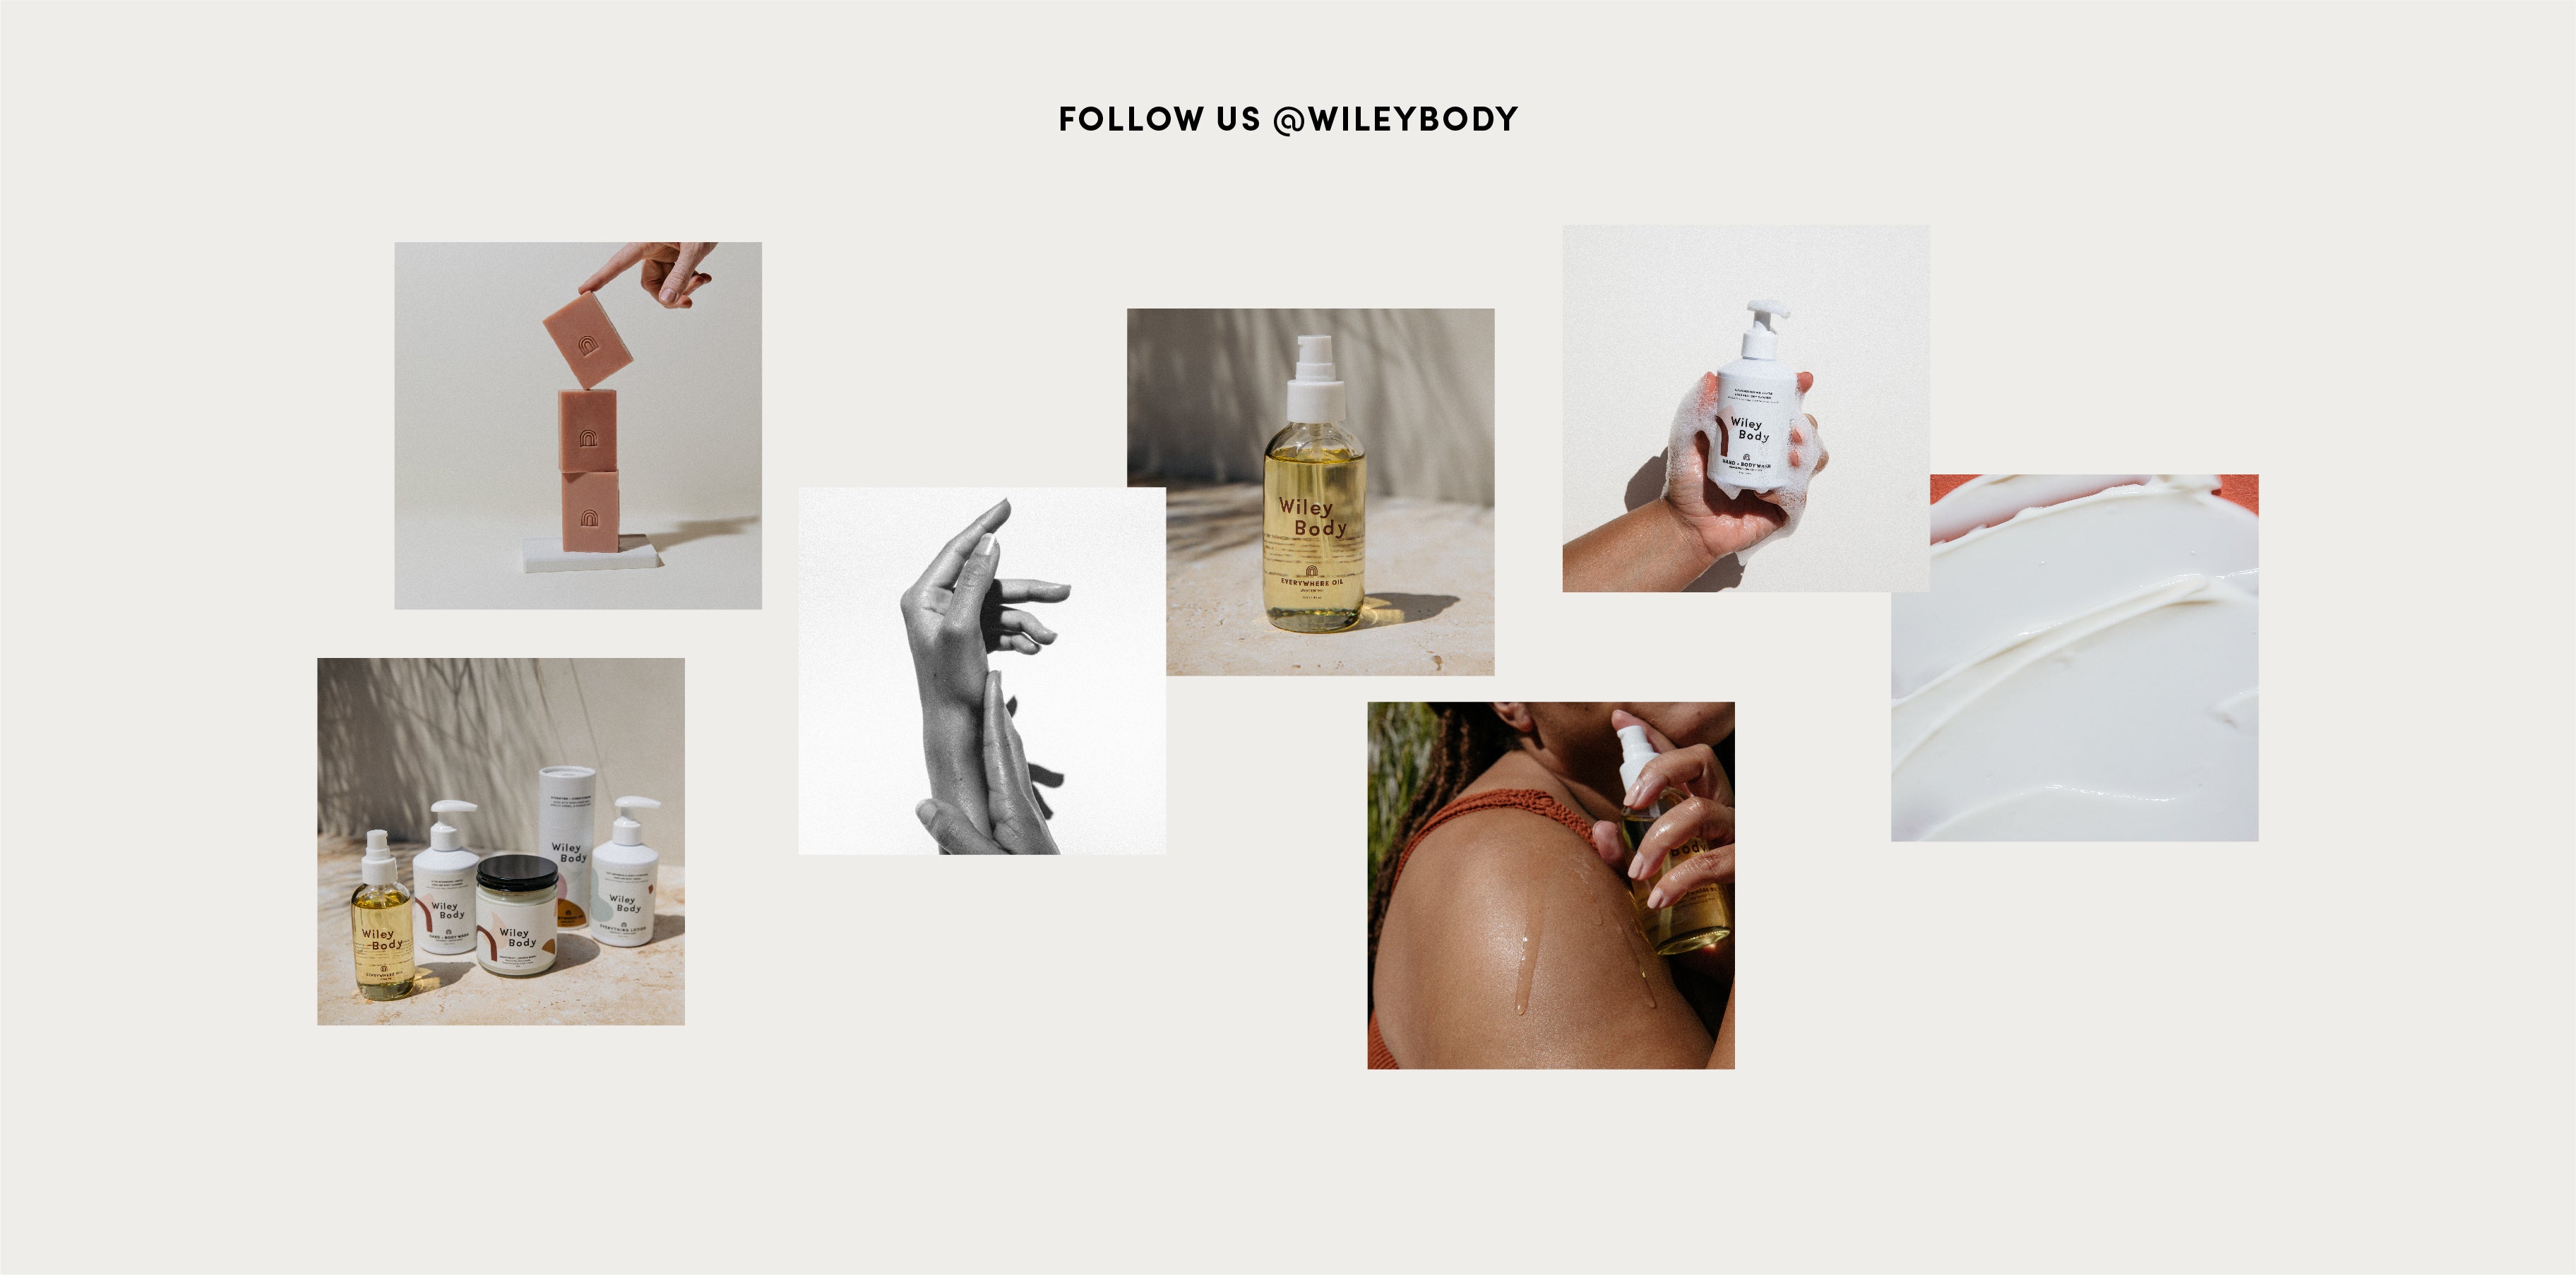 A collage of images from the Wiley Body IG account. 